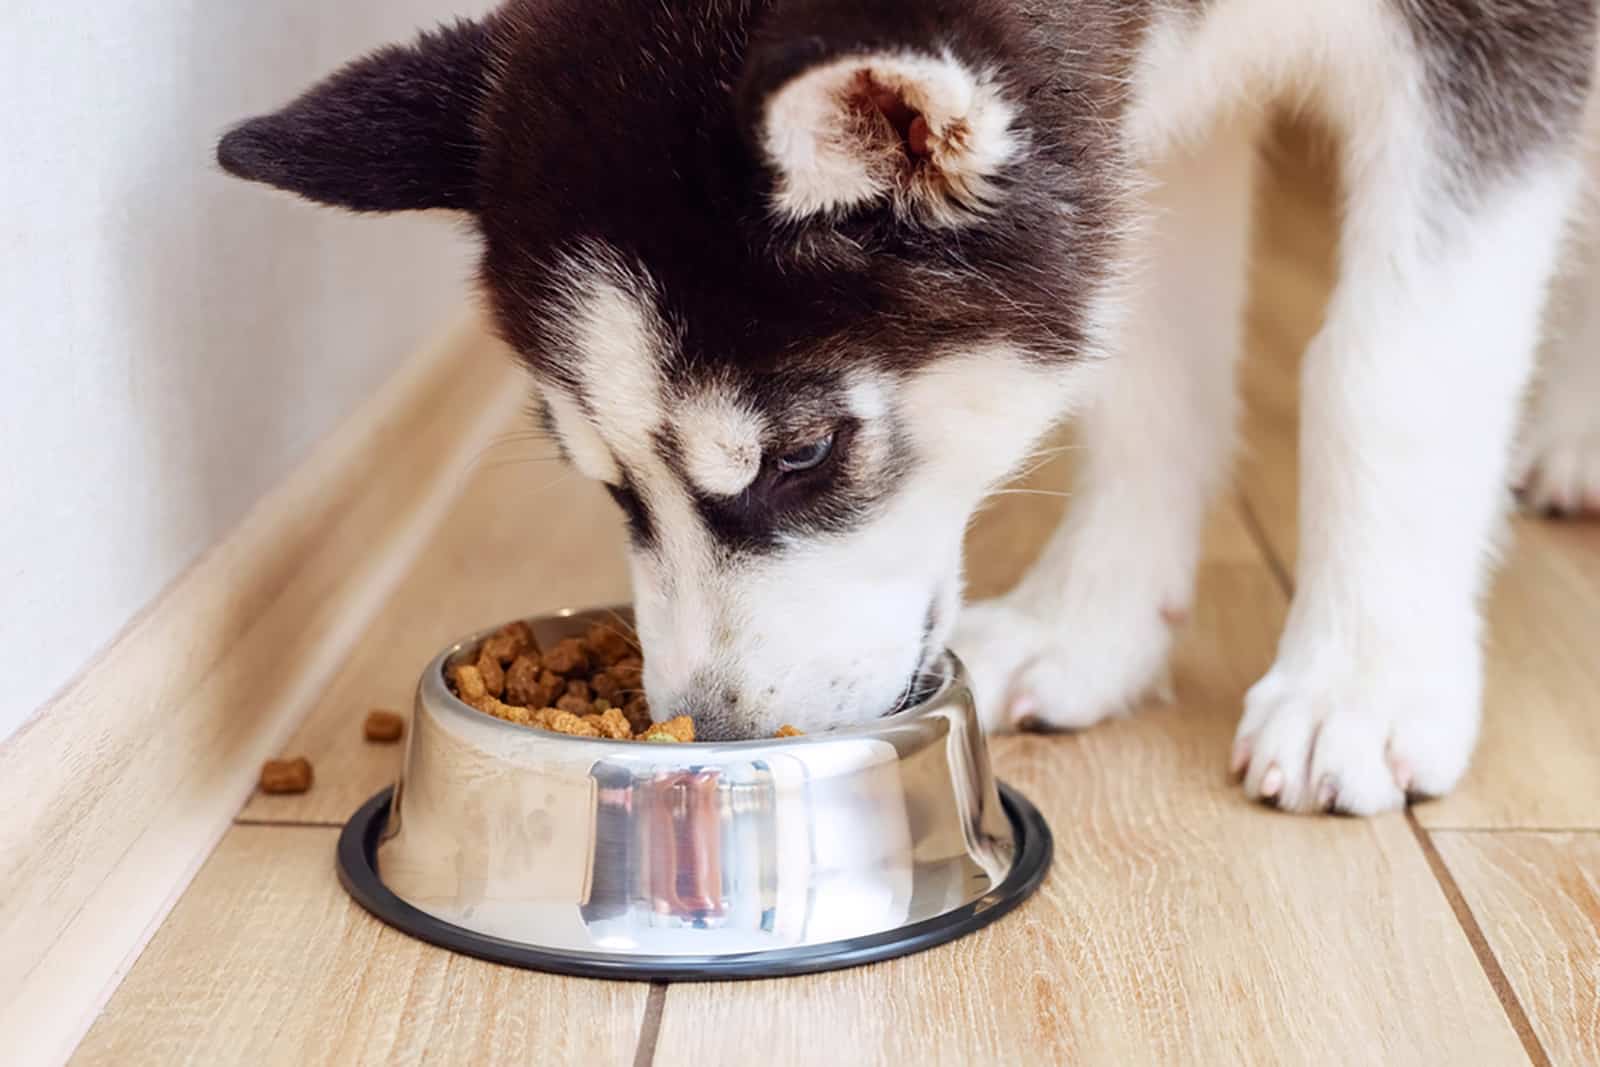 husky puppy eating from feeding bowl